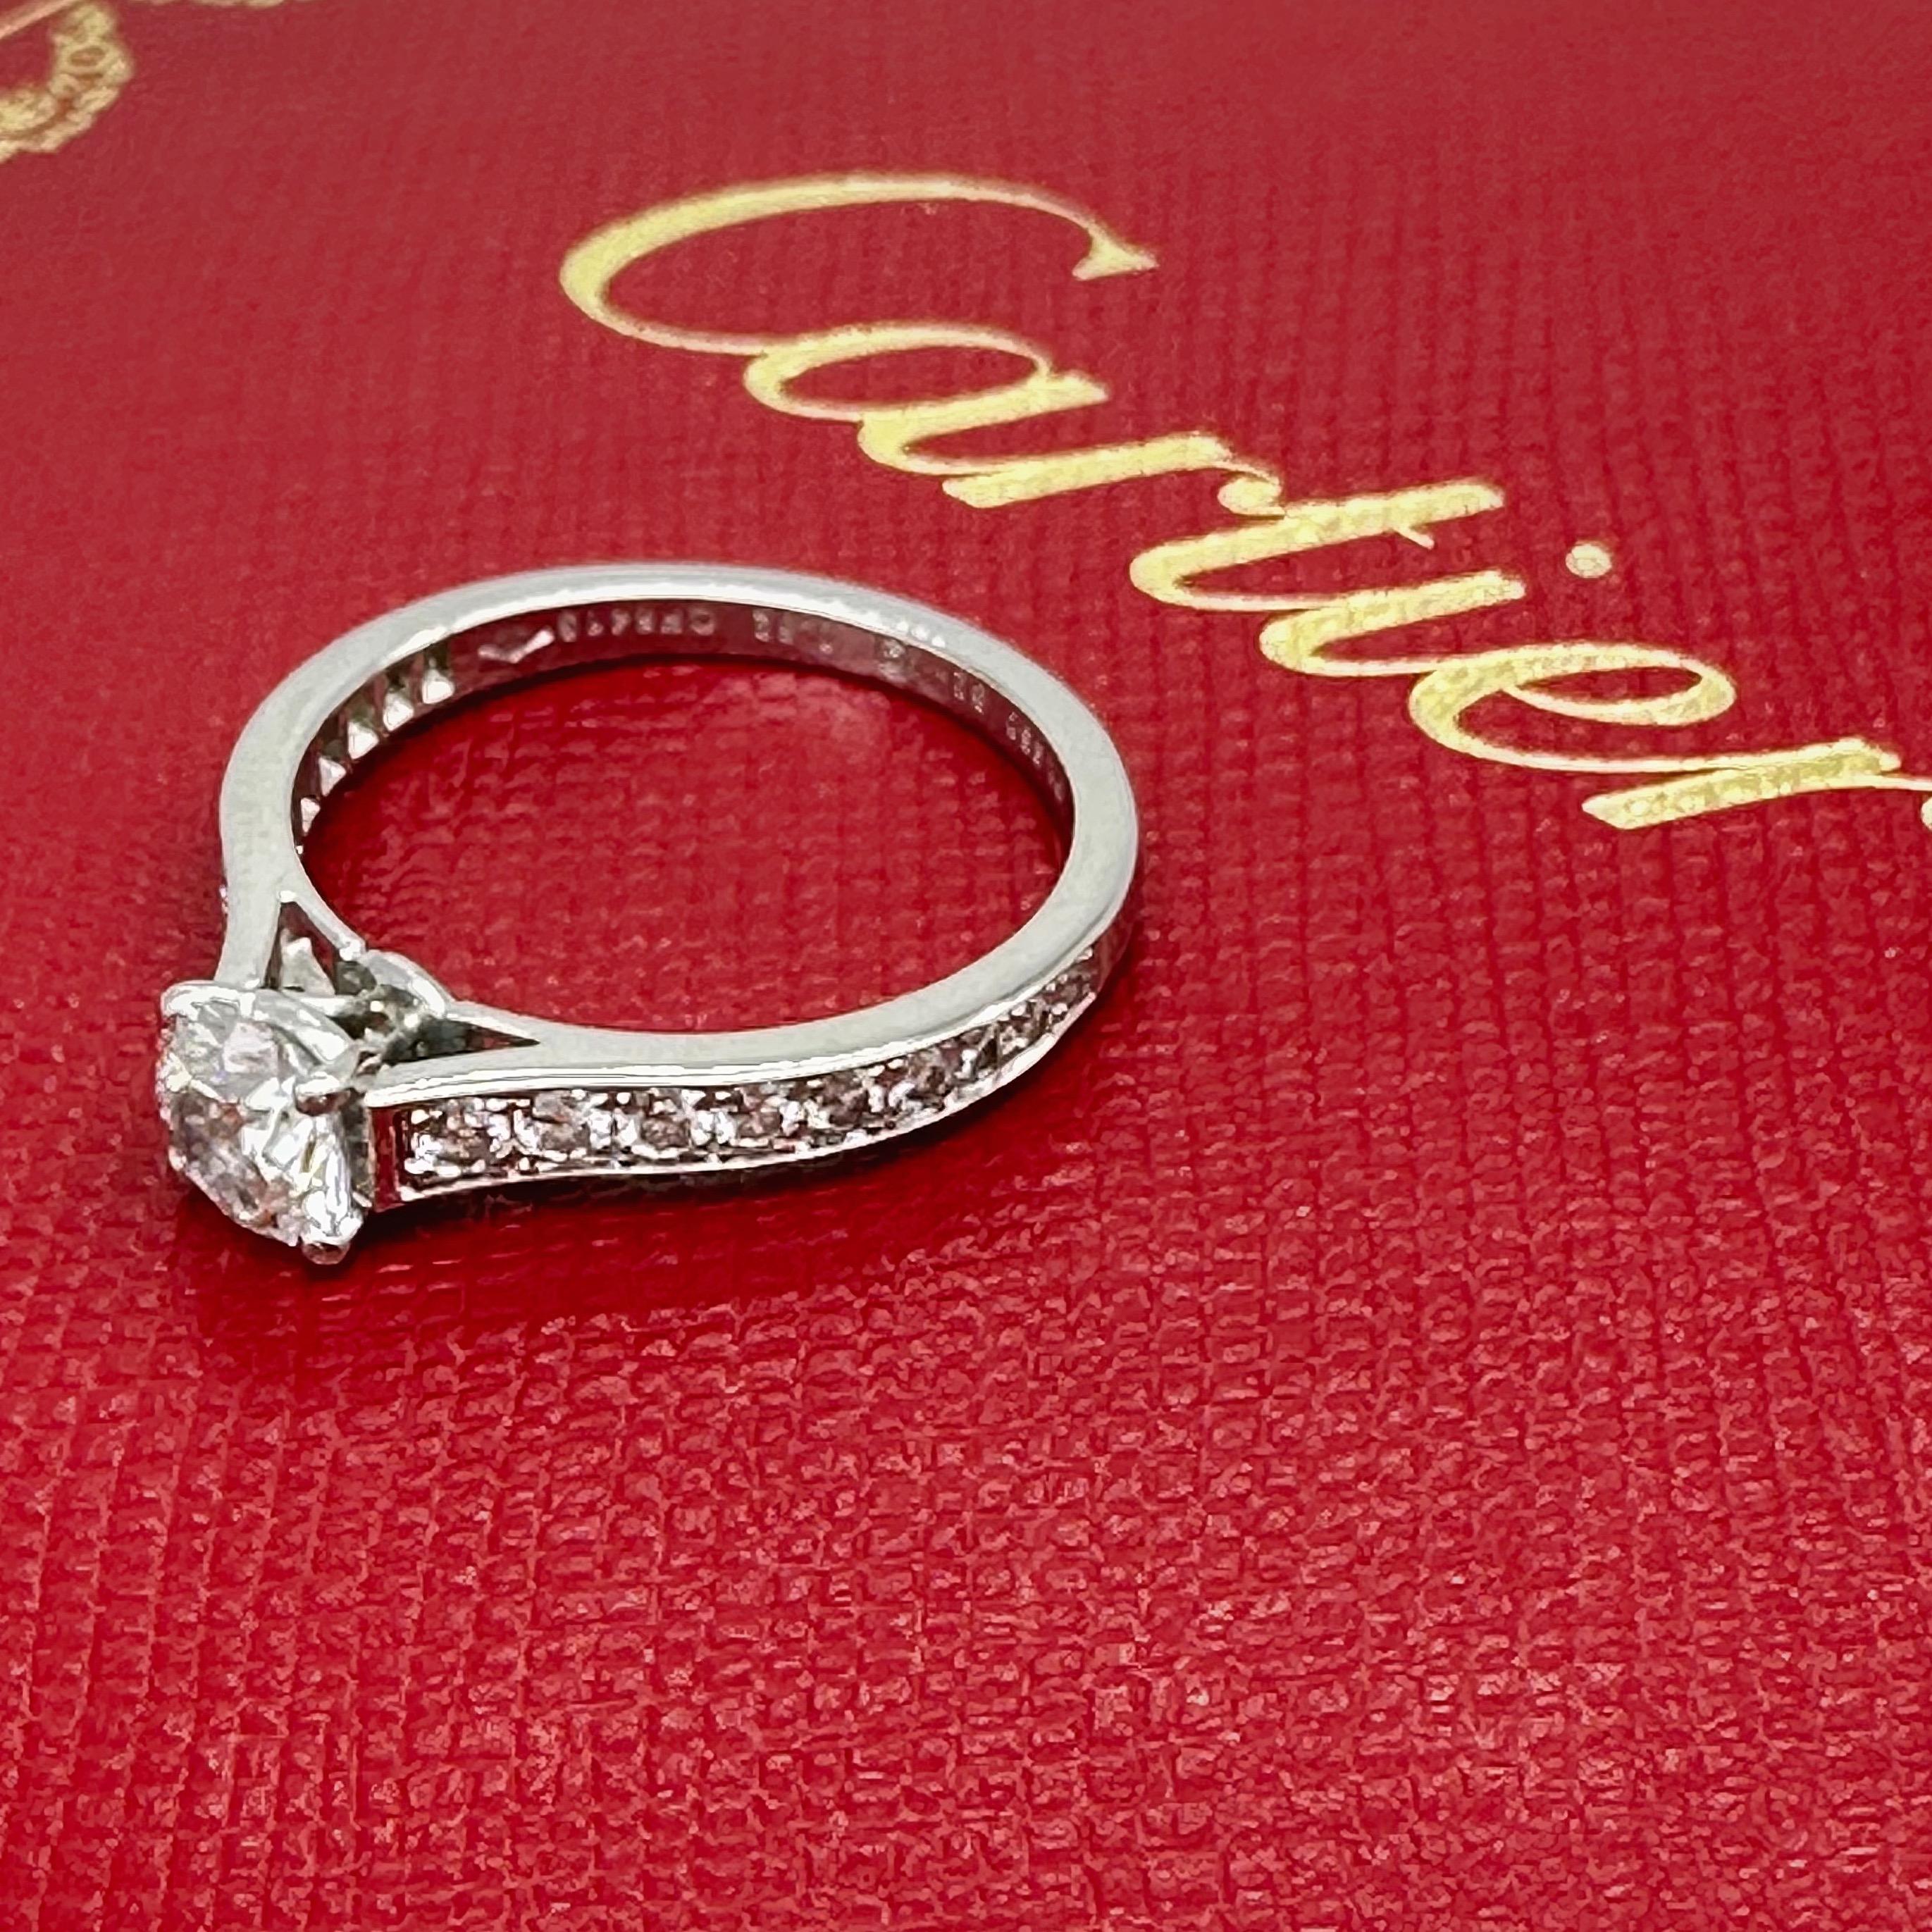 Cartier 1895 Round Diamond 0.88 tcw Engagement Ring in Platinum GIA COA Box For Sale 2